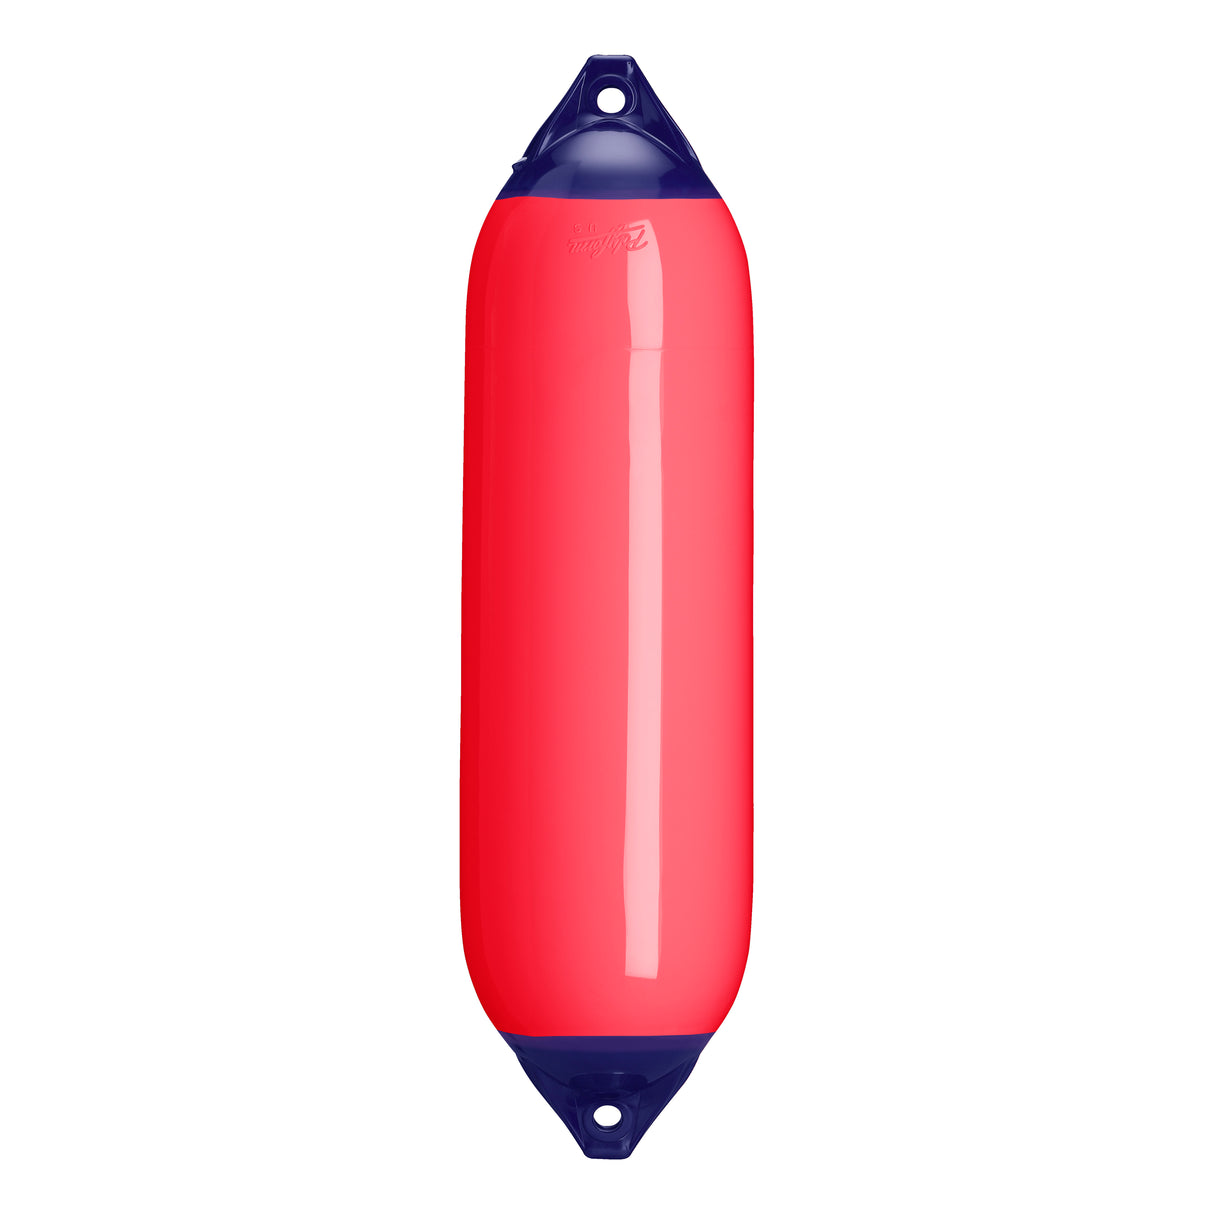 Red boat fender with Navy-Top, Polyform F-6 